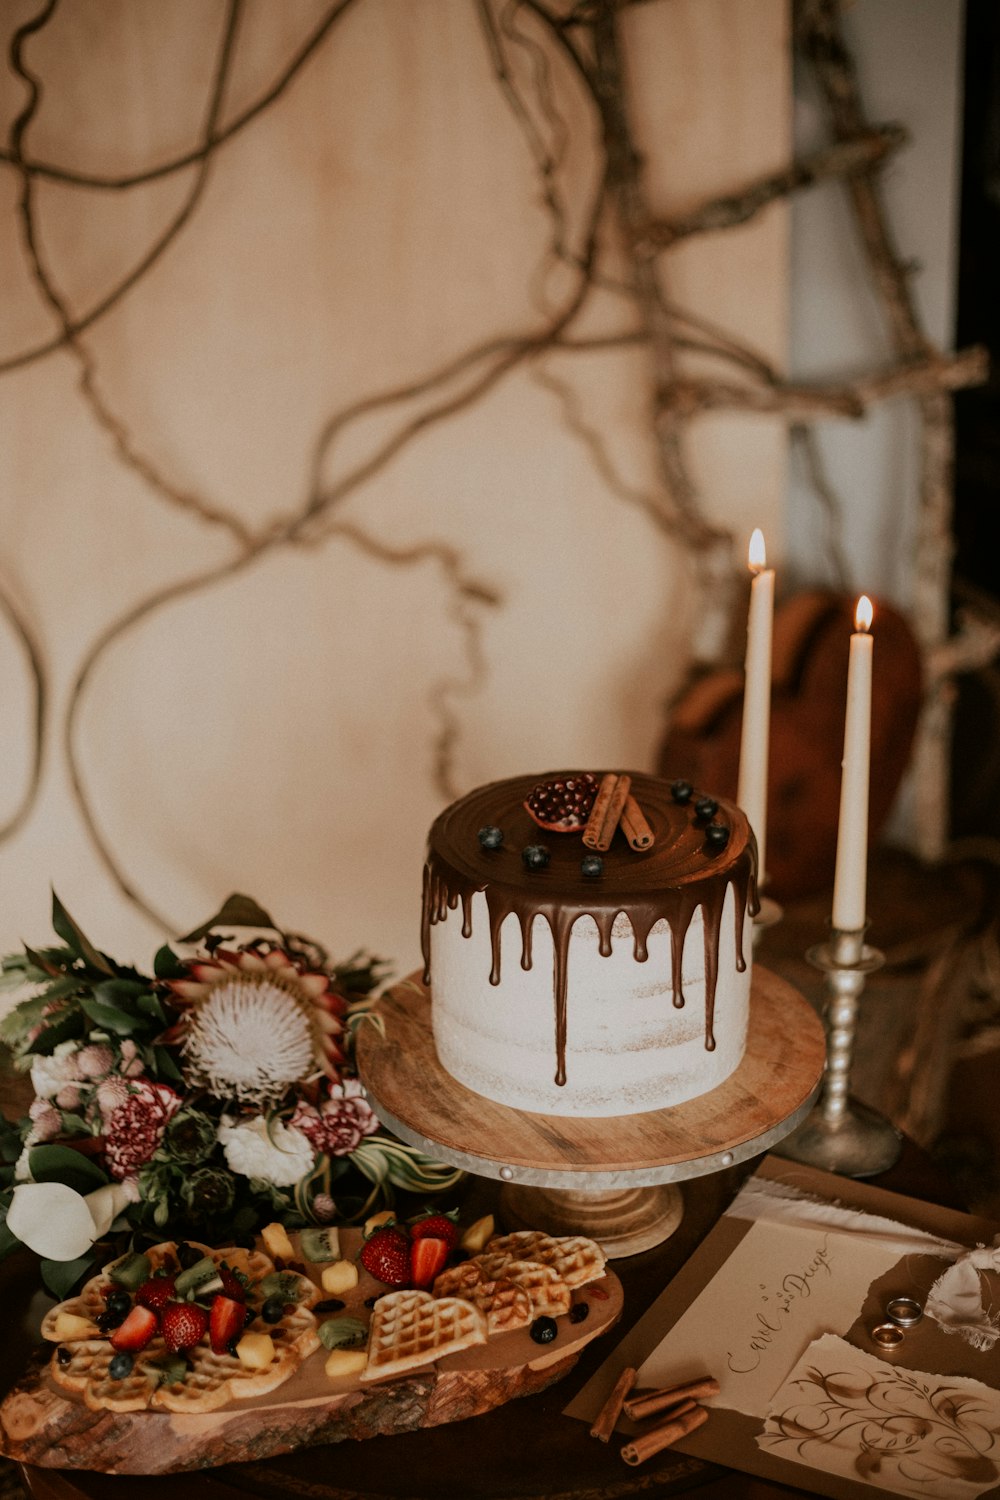 chocolate cake beside candles